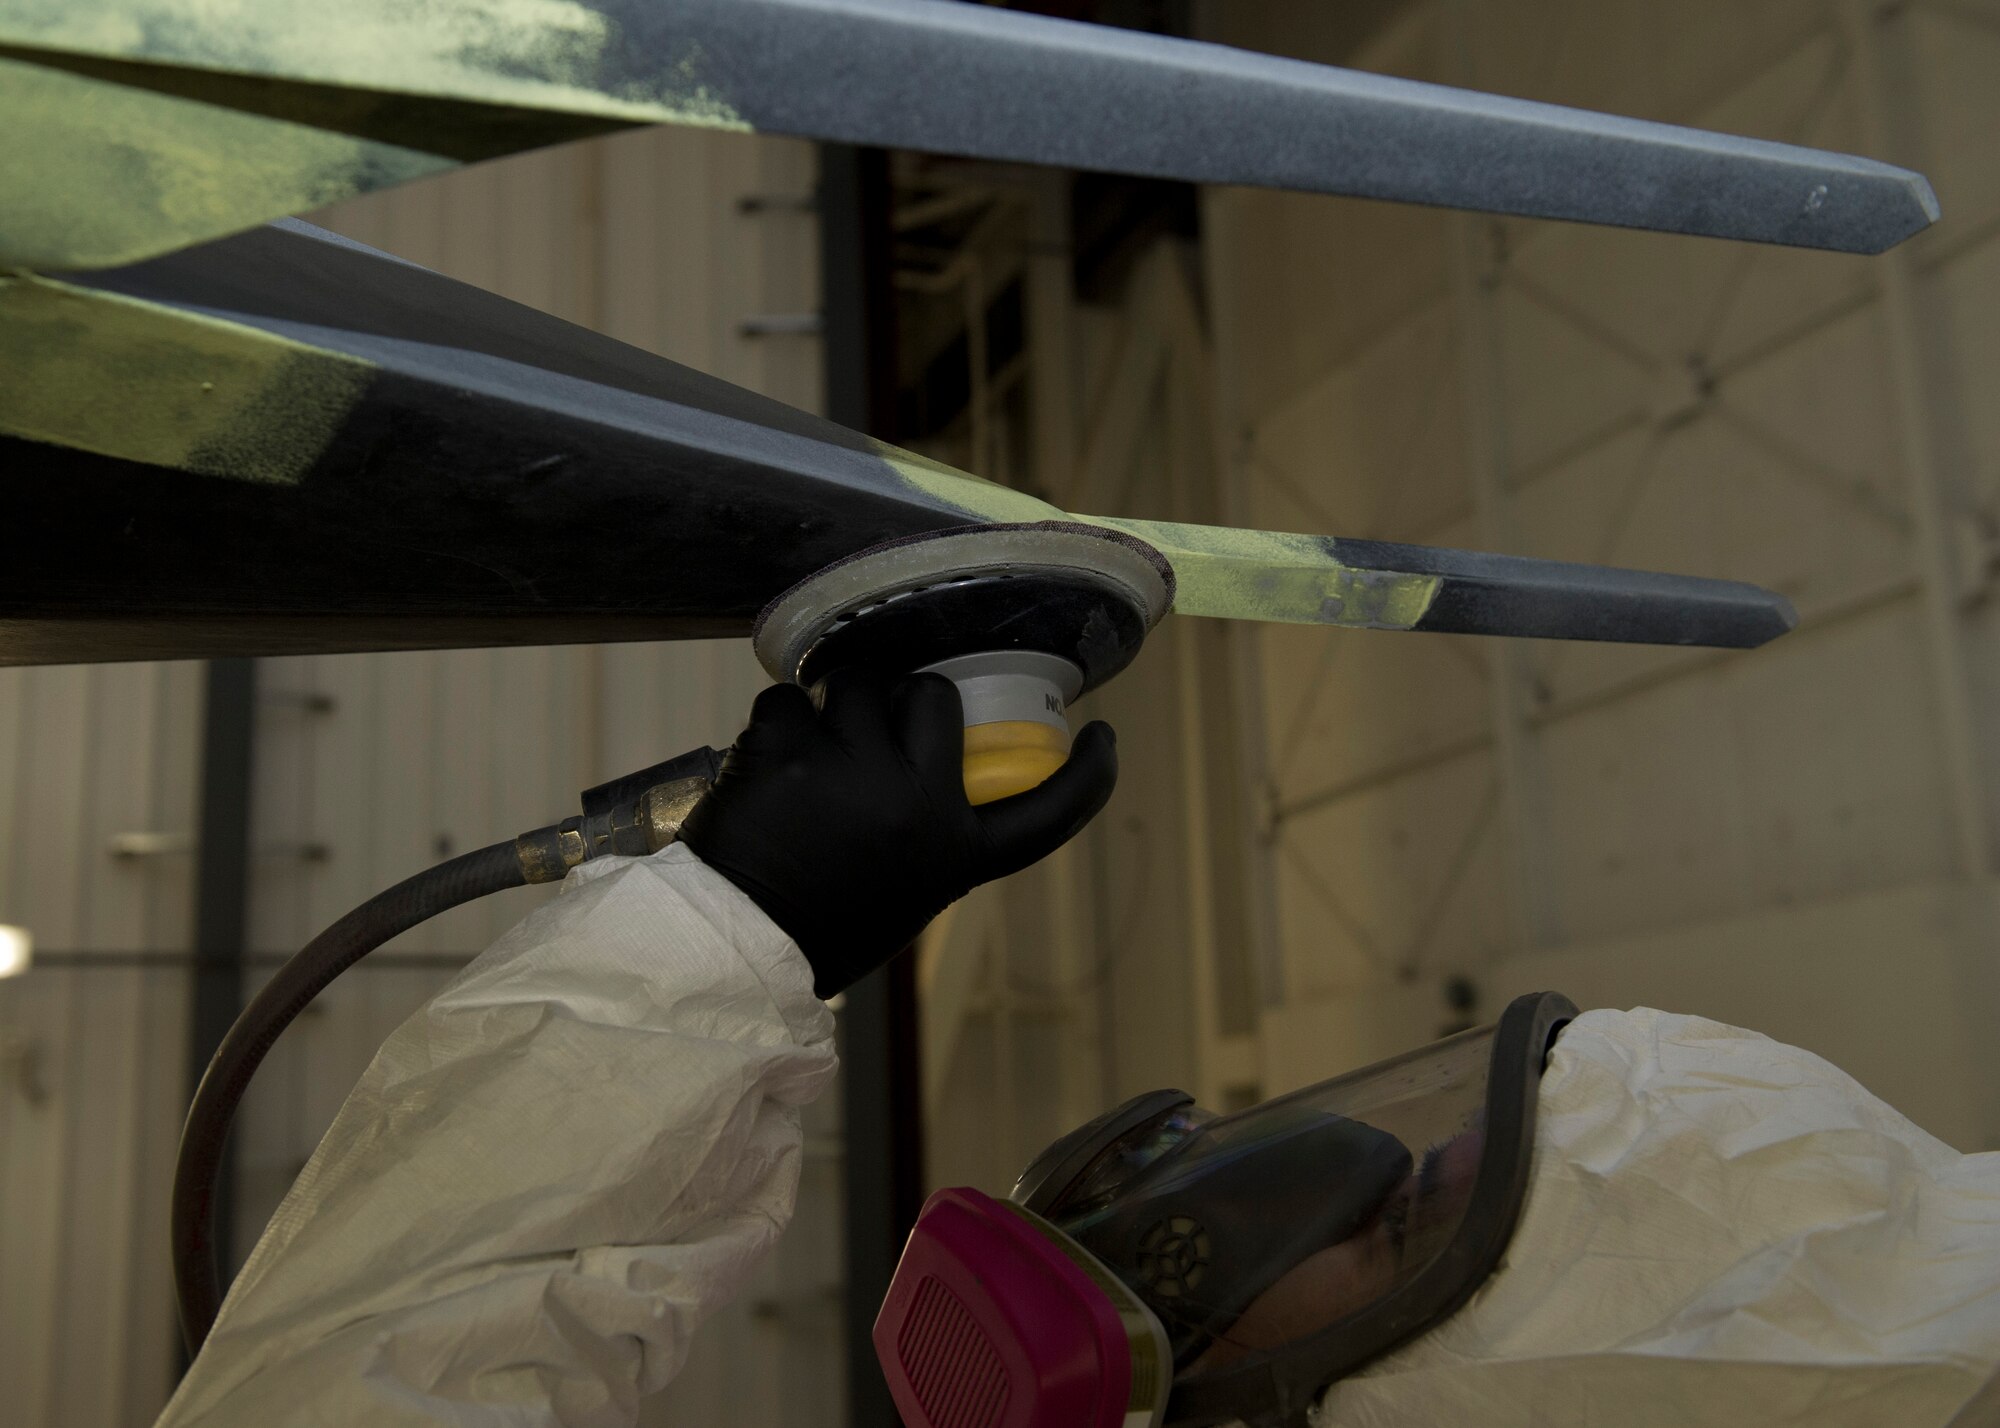 Staff Sgt. Julian Arroyo from the 49th Maintenance Squadron, fabrication flight, sands the F-117 at Holloman Air Force Base, N.M., March 13. The F-117 has been on static display in Holloman’s Heritage Park since its retirement in 2008. Due to sun and inclement weather damage the 49 MXS removed and towed the aircraft to the hangar to begin the restoration process. Airmen will perform structural maintenance on the Nighthawk and give the aircraft a fresh paint job before returning it for display in Heritage Park. (U.S. Air Force photo by Airman 1st Class Leah Ferrante/Released)